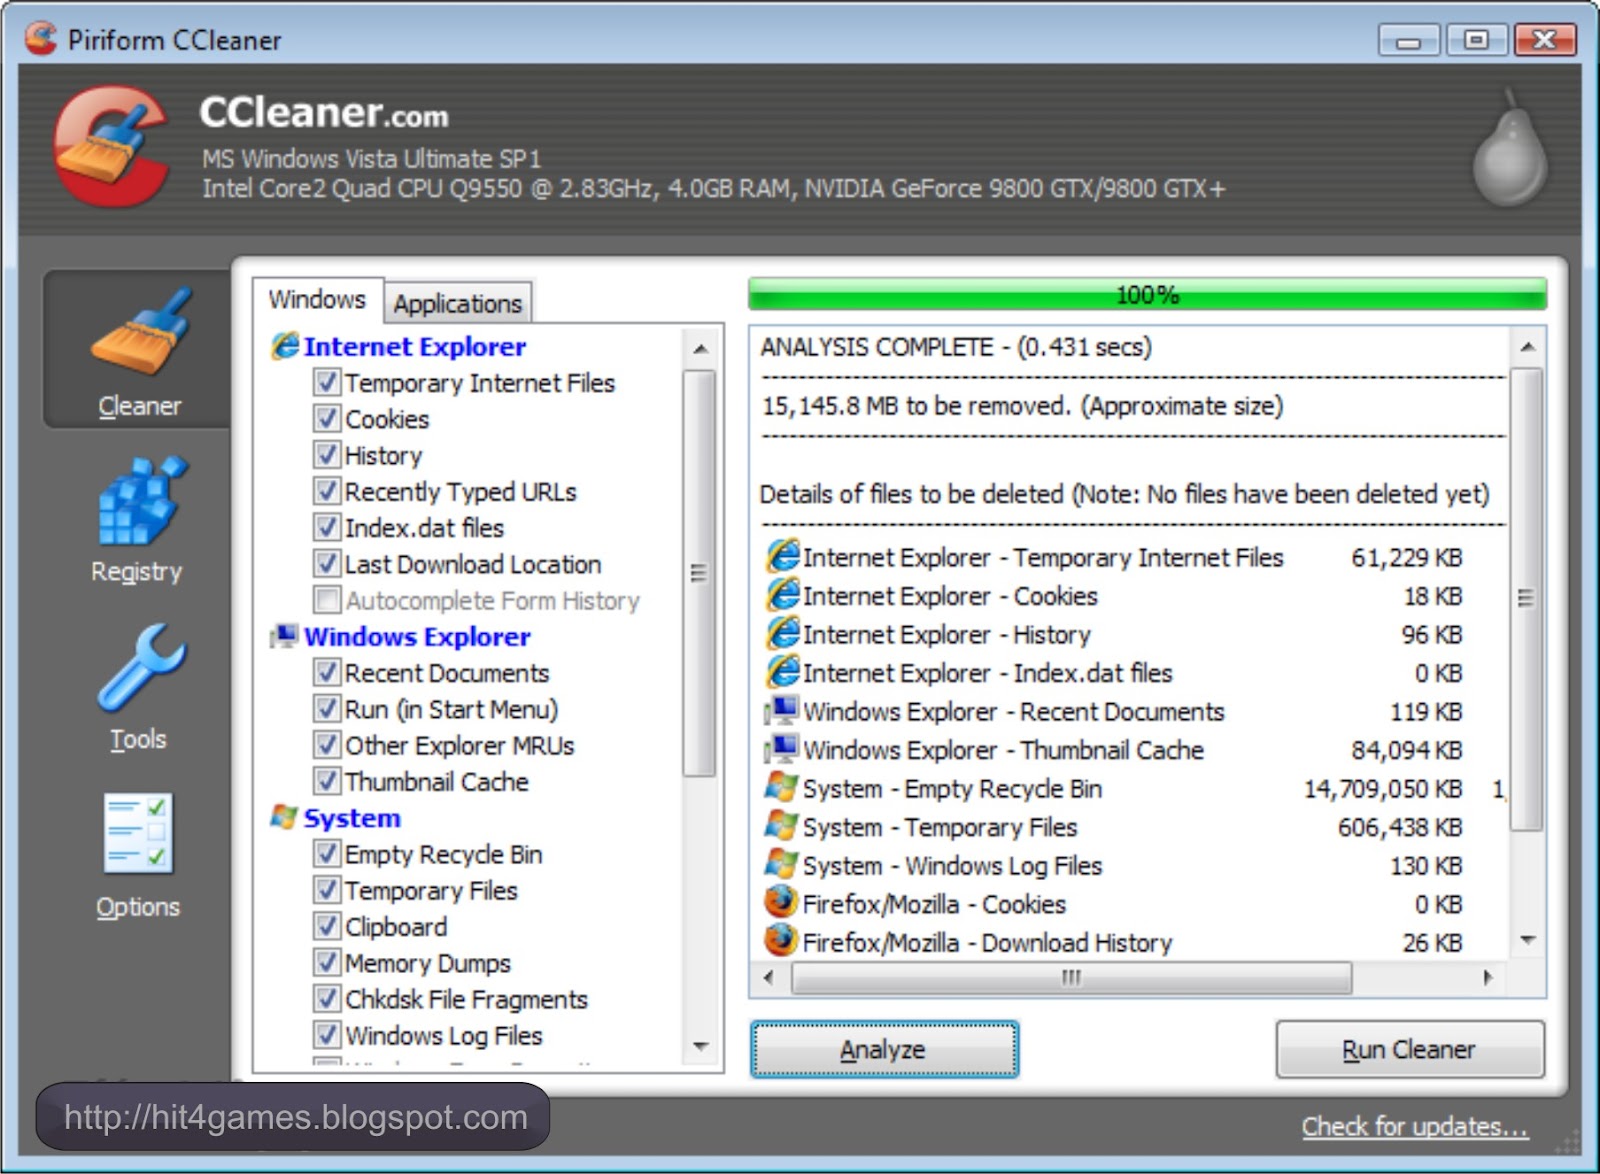 How to download ccleaner professional free - Free download ccleaner free download za windows 7 temporada lista negra todos